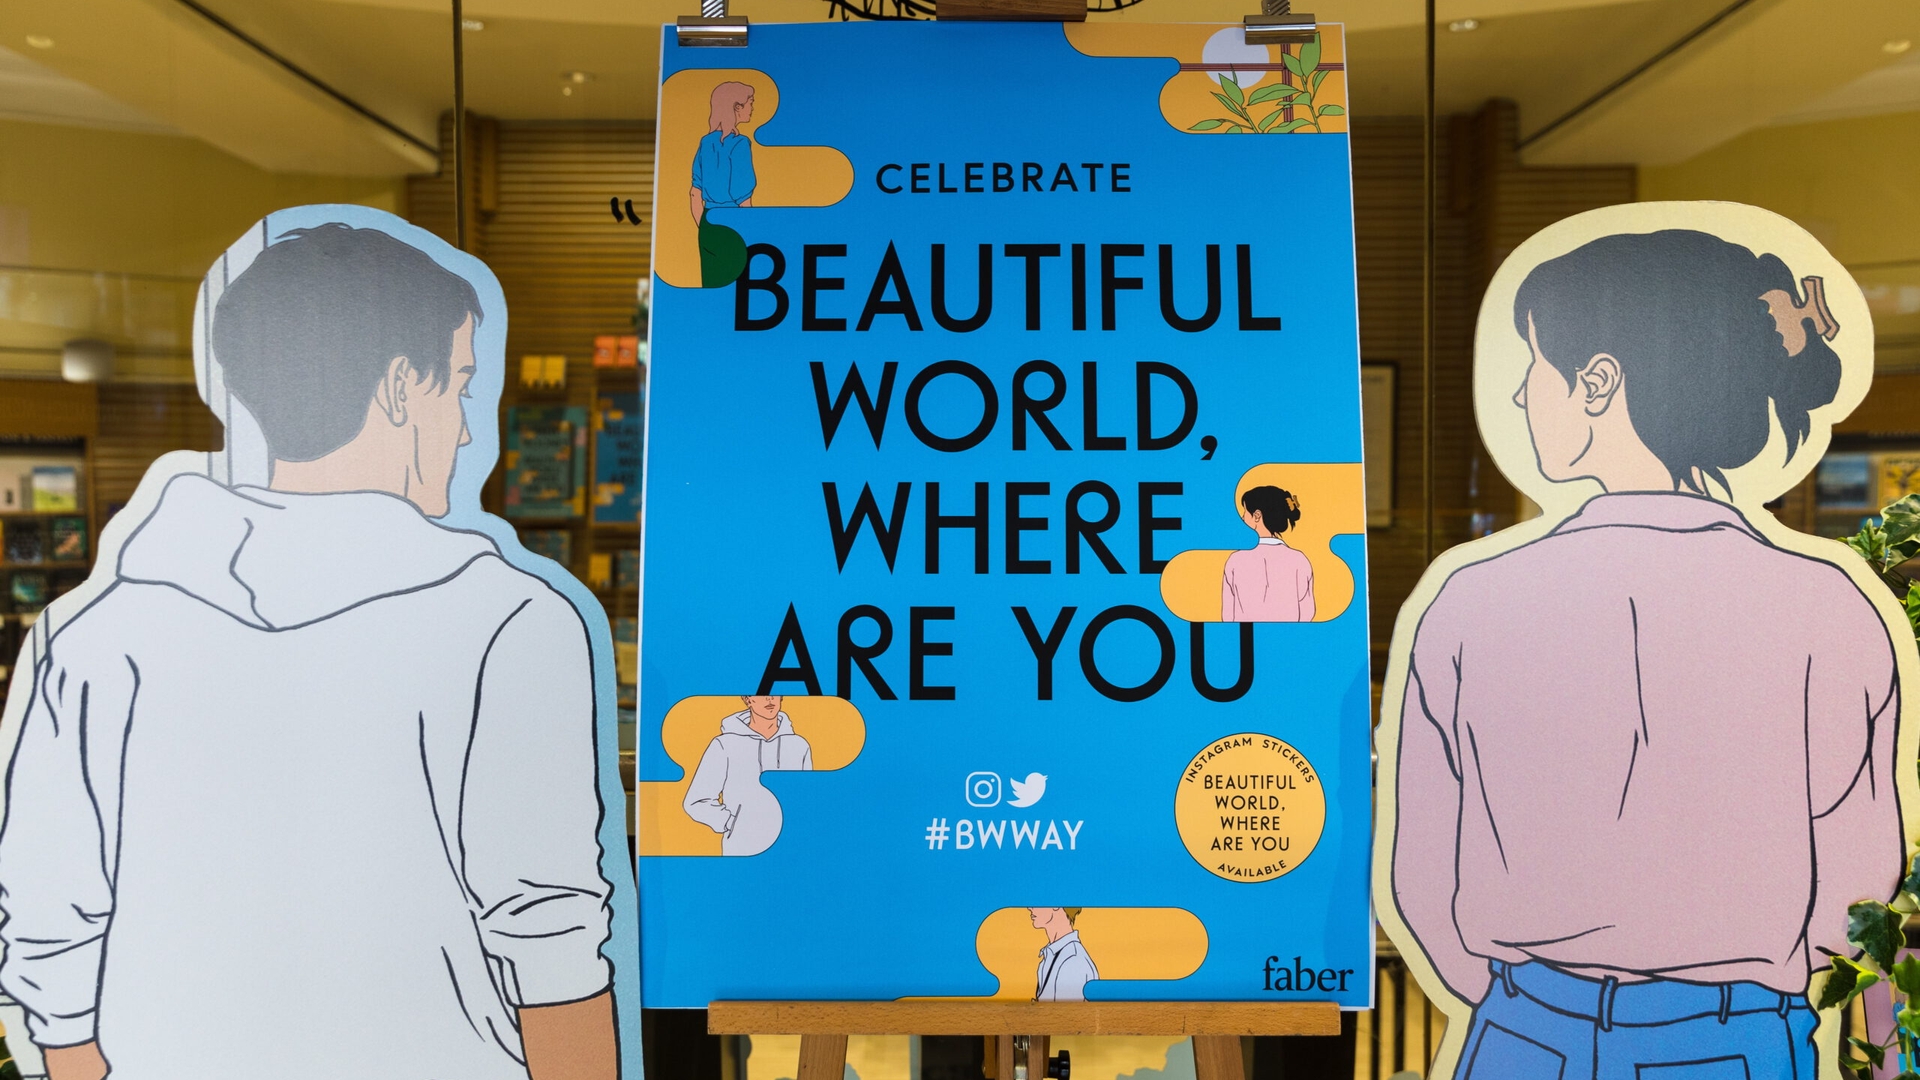 Beautiful World, Where Are You book launched in London